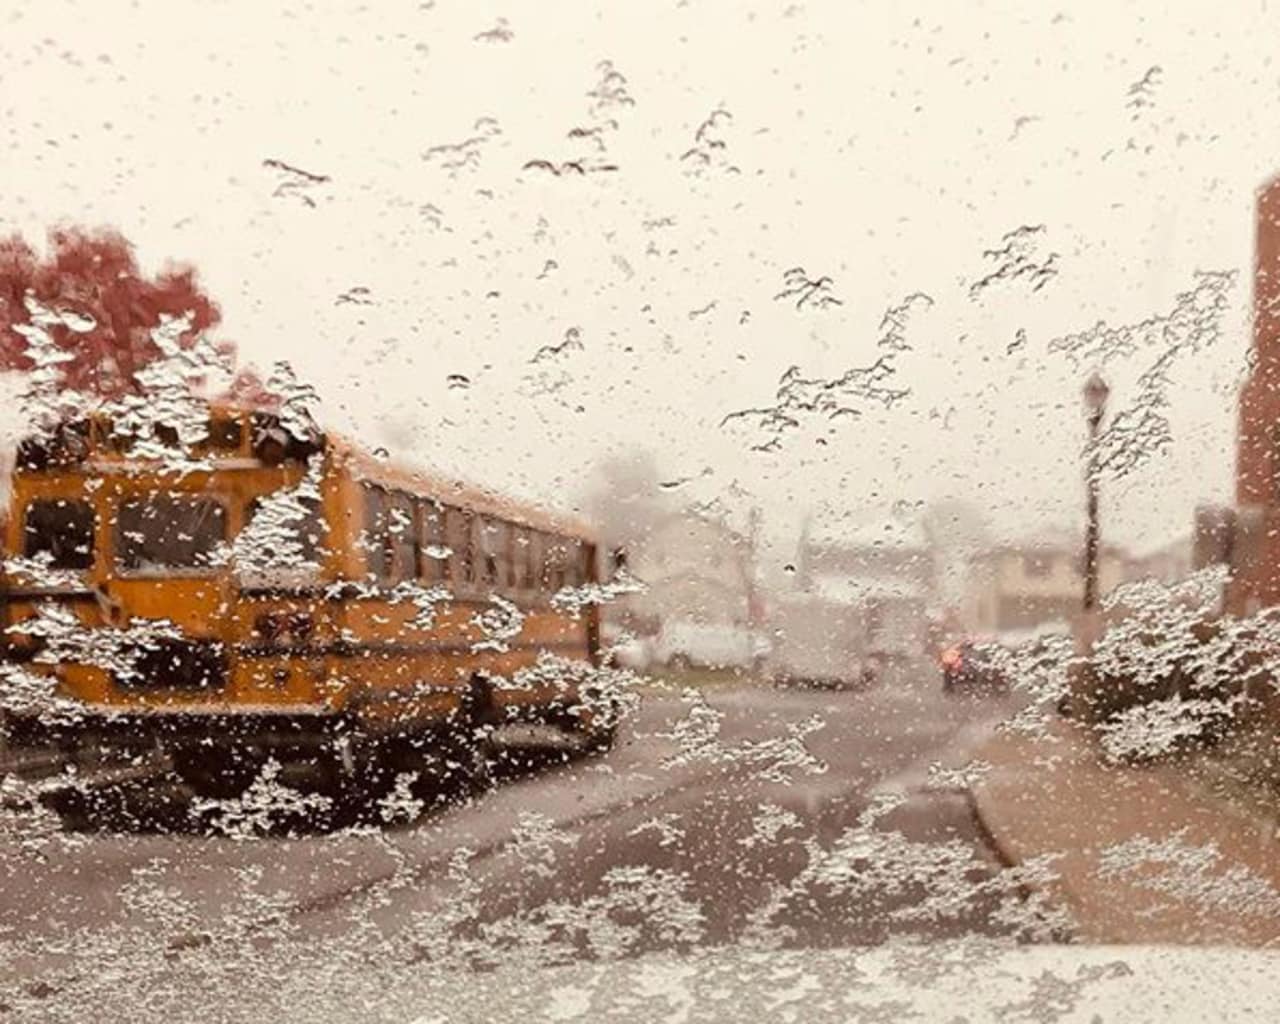 Many schools are closed following Thursday's storm.